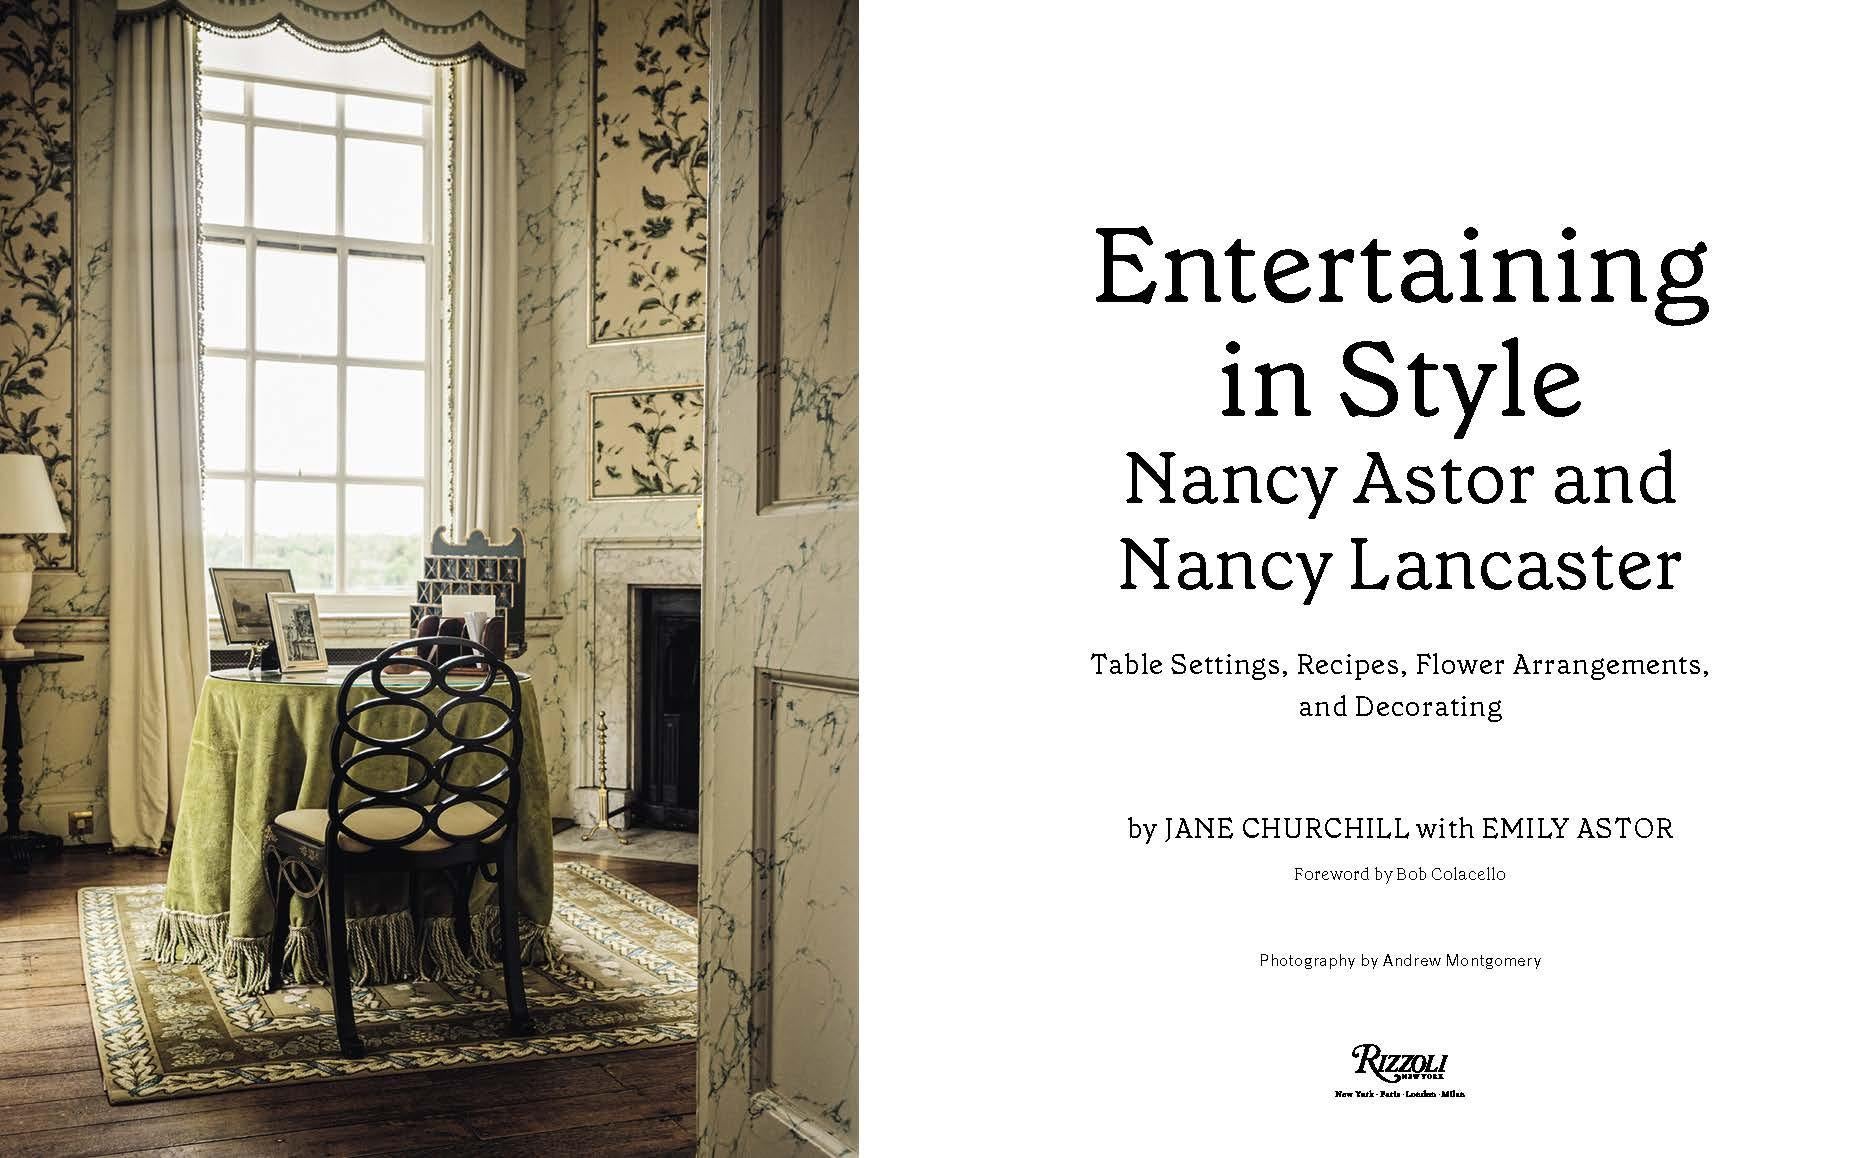 Entertaining in Style: Nancy Astor and Nancy Lancaster: Table Settings, Recipes, Flower Arrangements, and Decorating

Author Jane Churchill and Emily Astor, Foreword by Bob Colacello, Photographs by Andrew Montgomery

This book showcases